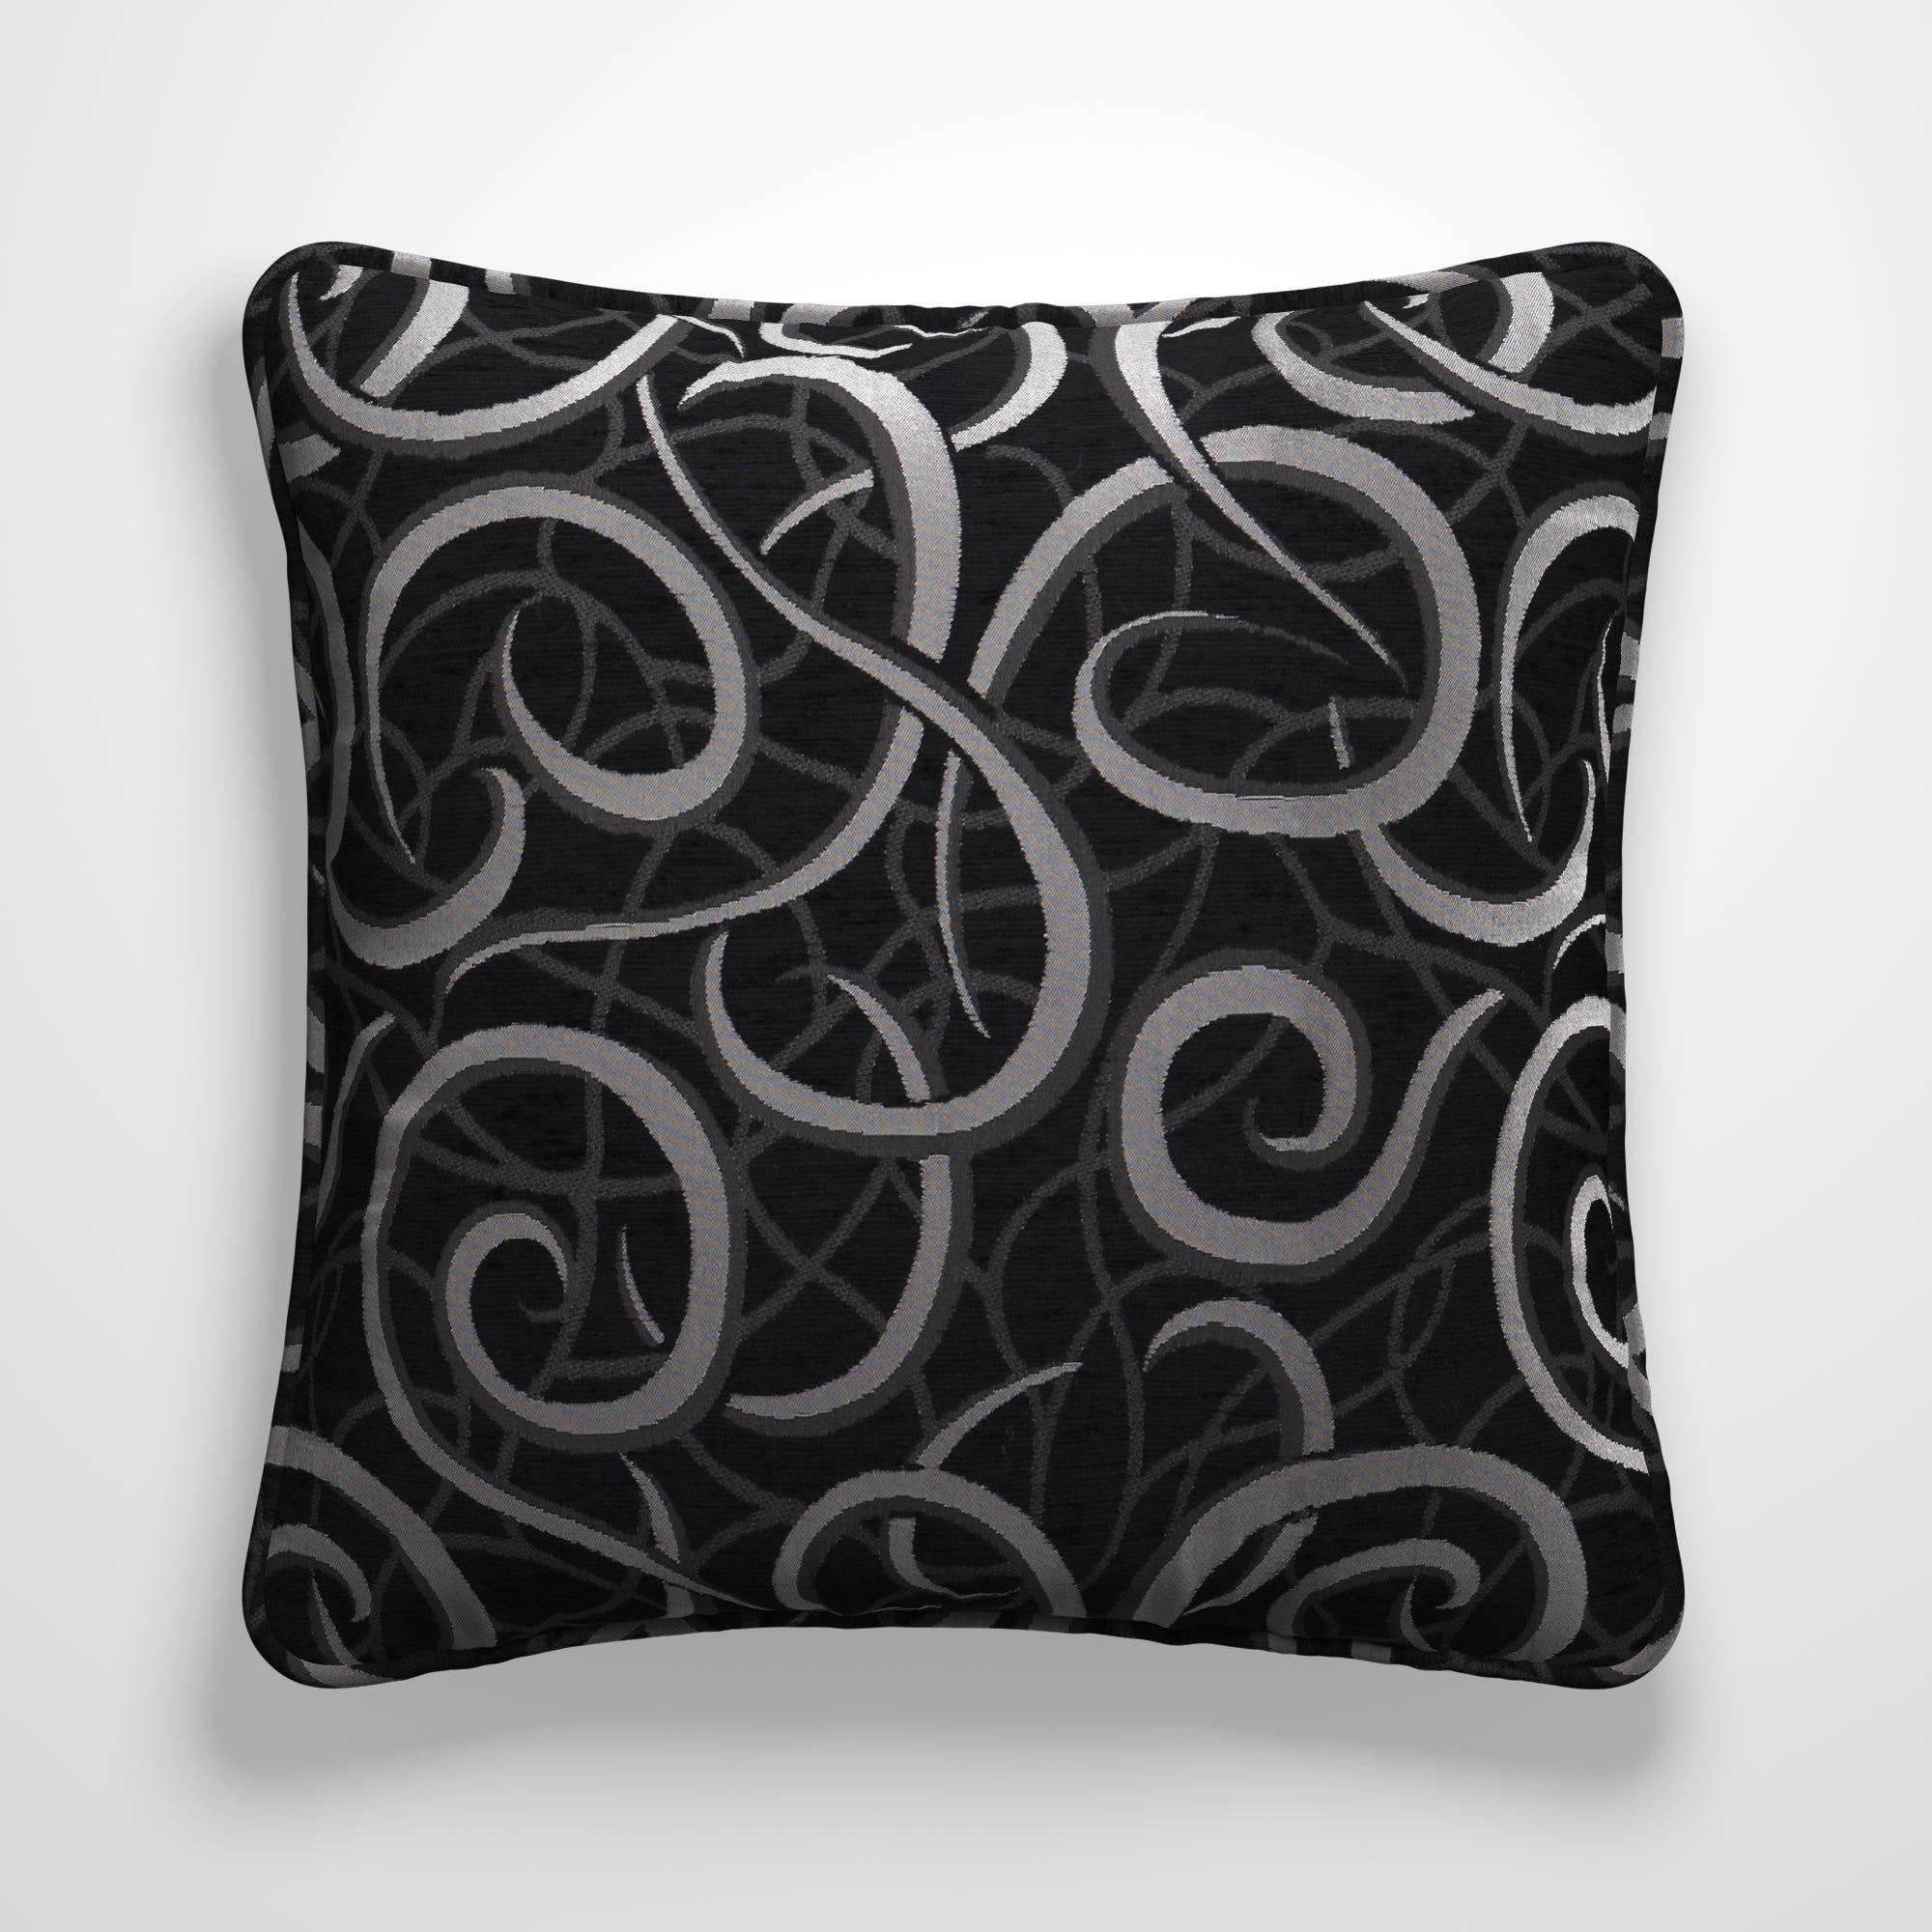 Inspiration Made to Order Cushion Cover Inspiration Black